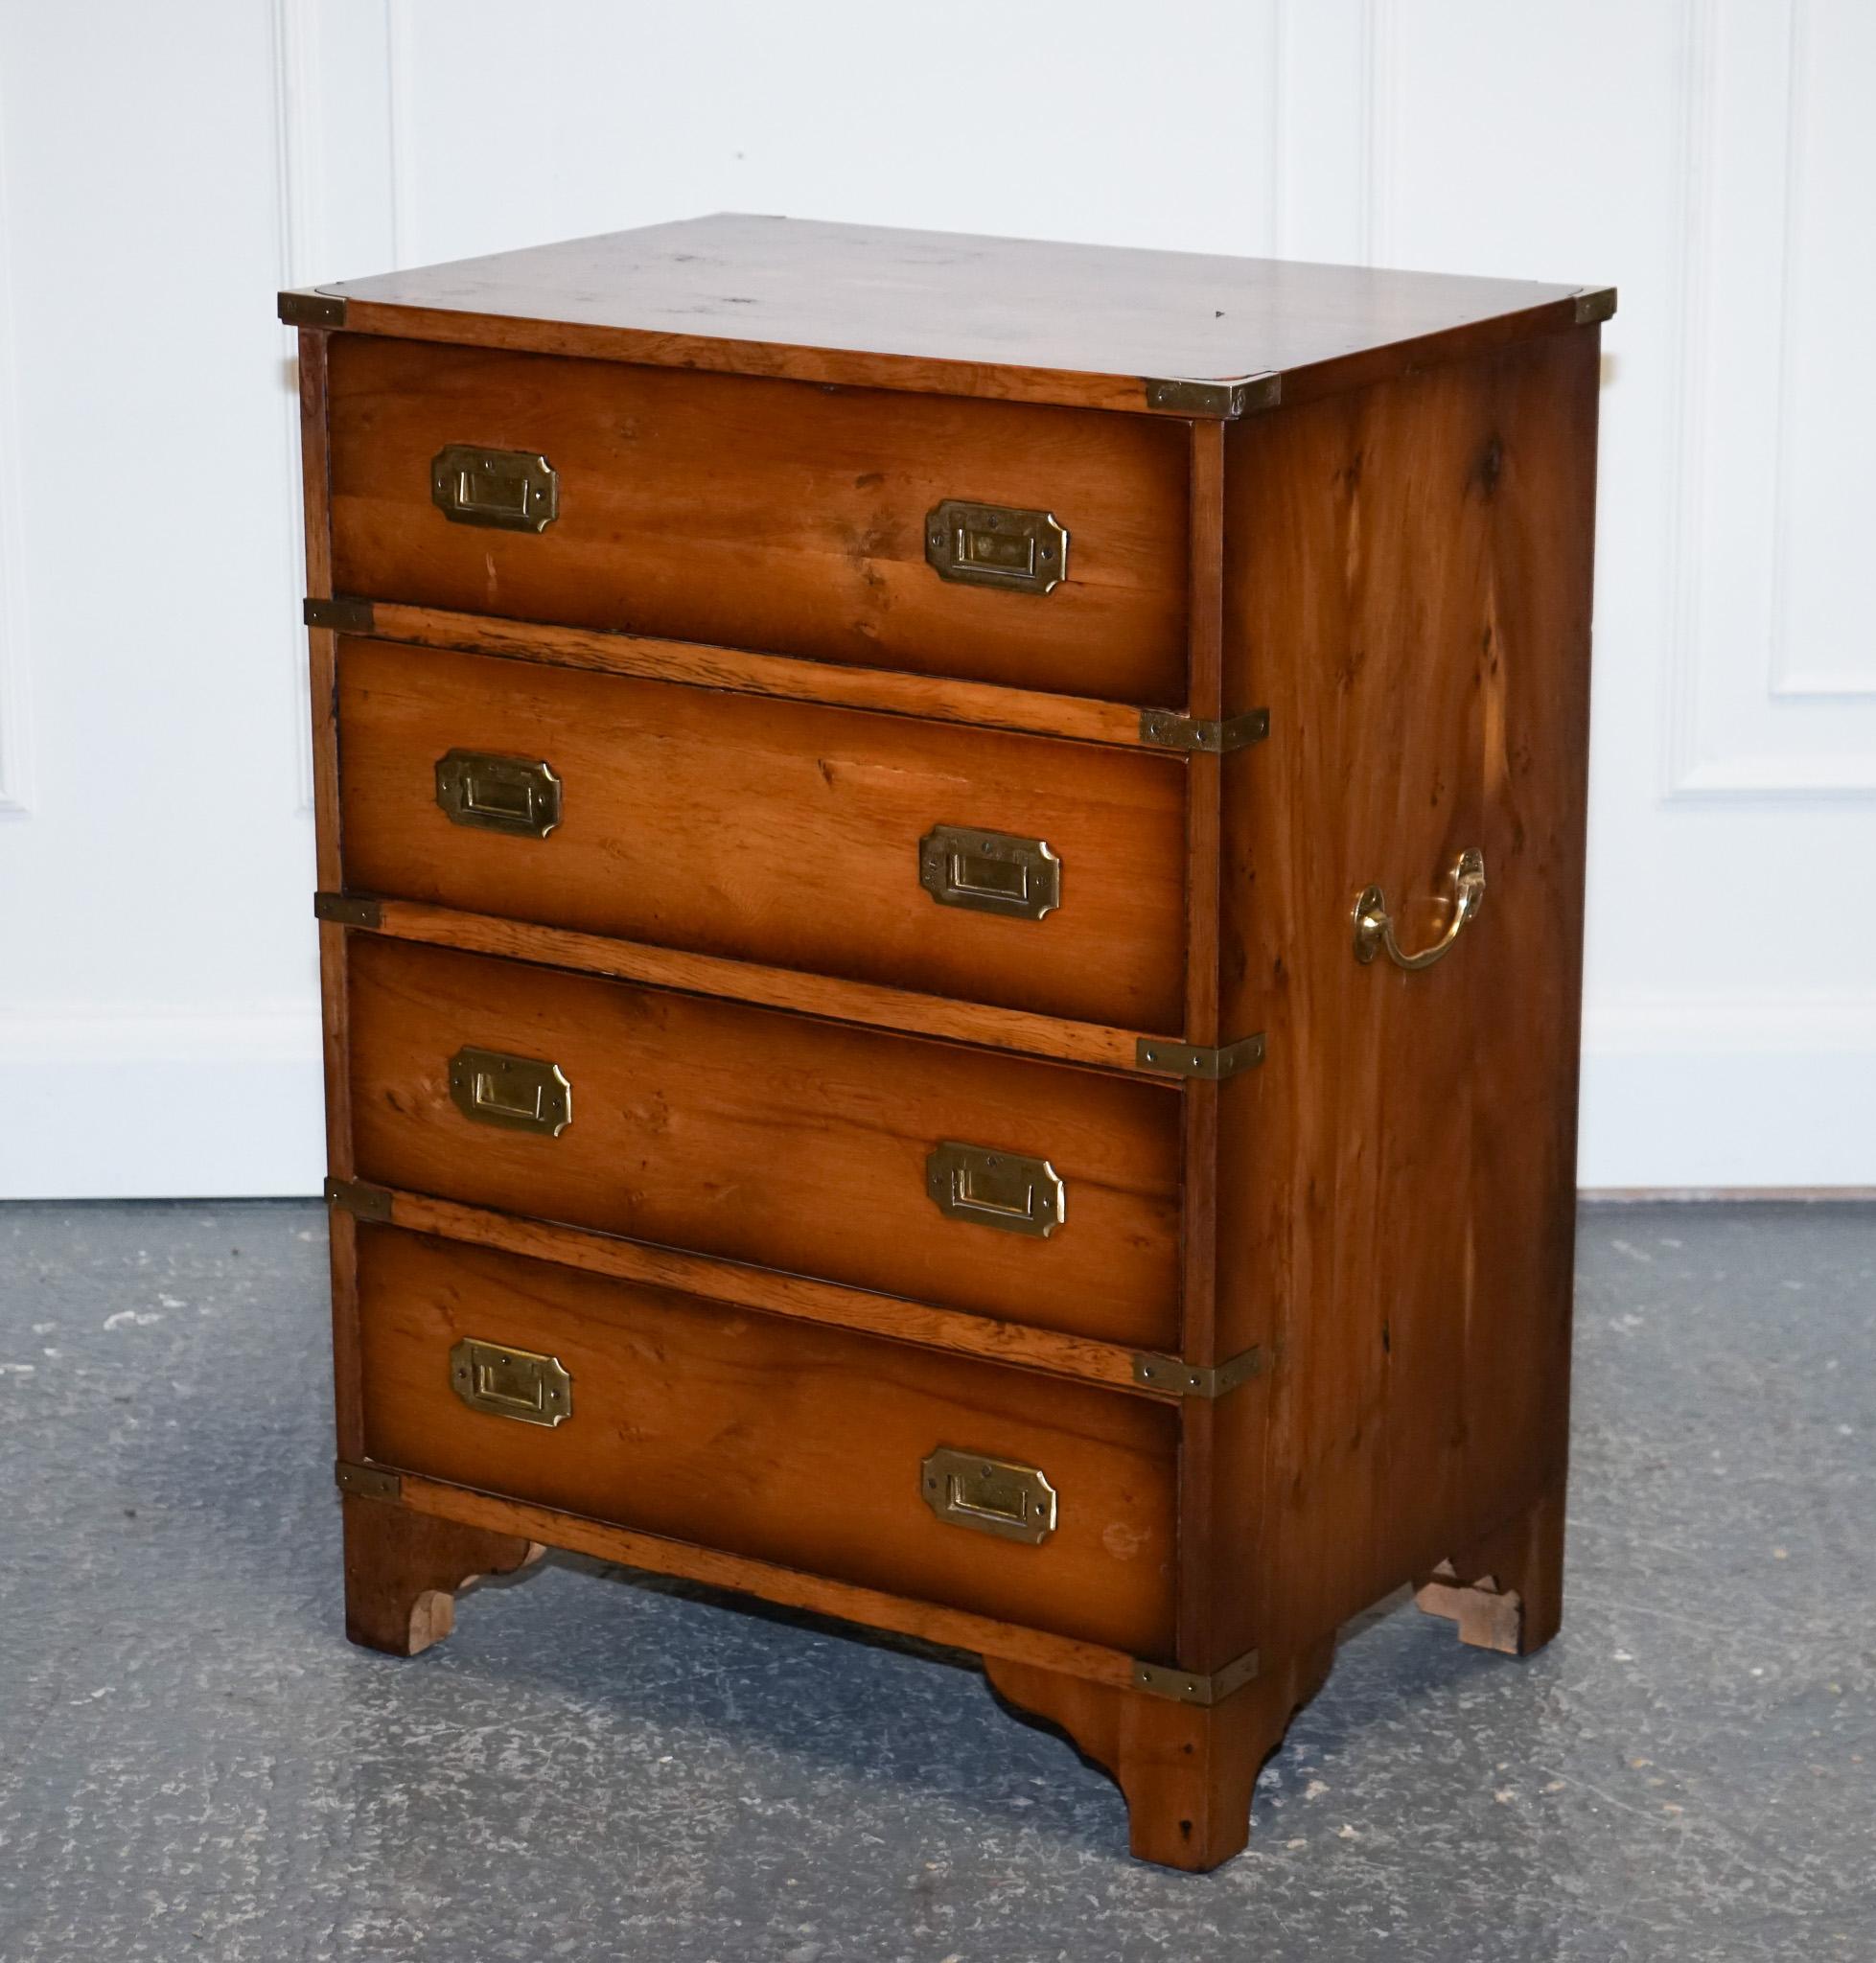 We are delighted to offer for sale this Lovely Burr Yew Wood Military Campaign Chest Of Drawers.

Crafted with the utmost attention to detail, this chest is a perfect display of elegance and functionality. The burr yew wood adds an air of natural